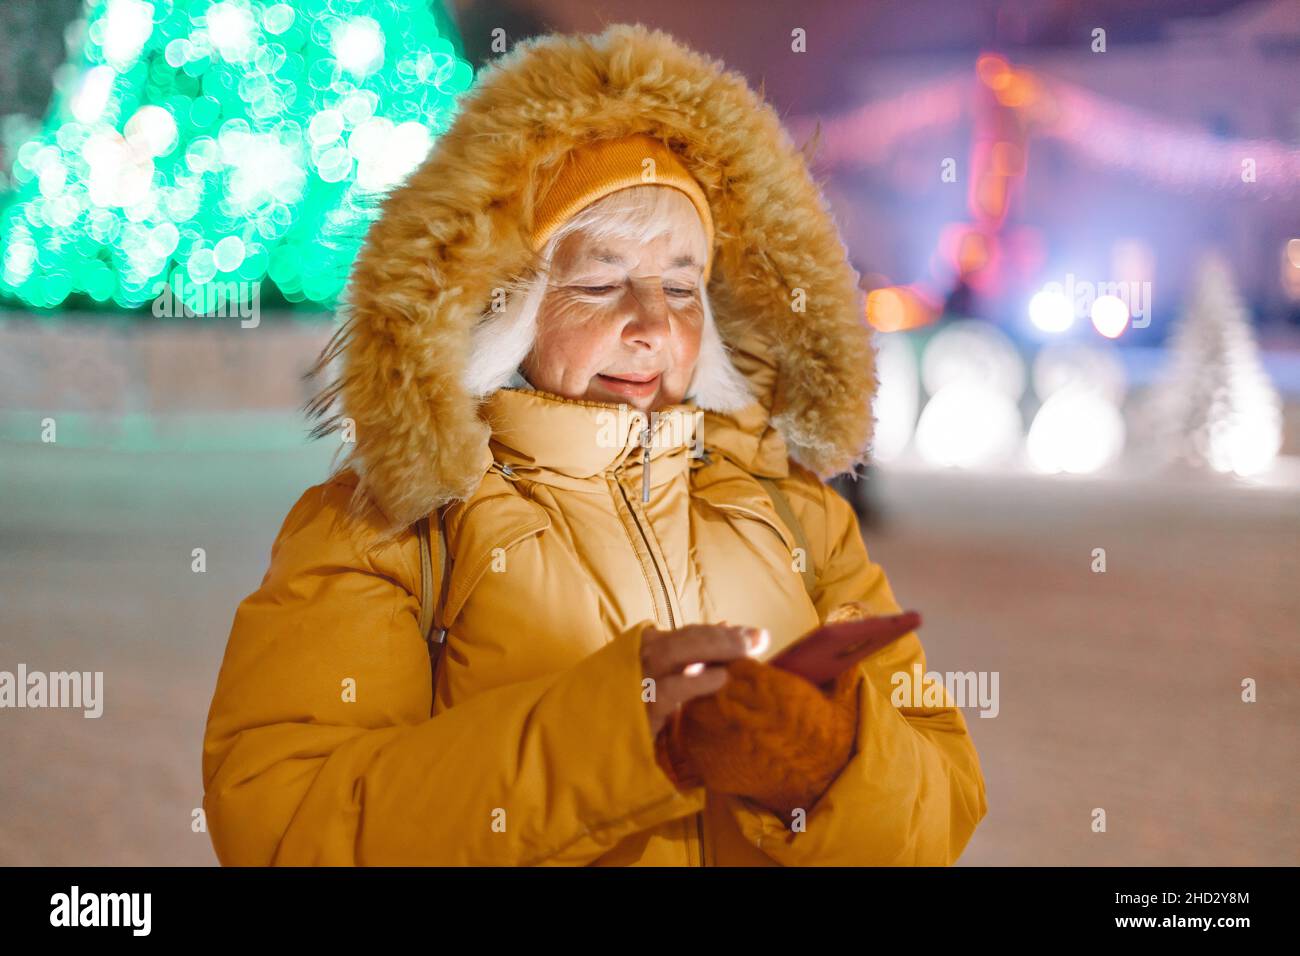 40s 50s woman in a yellow warm jacket using phone outdoors on street background decorated with Christmas lights at evening in winter. Communication Stock Photo